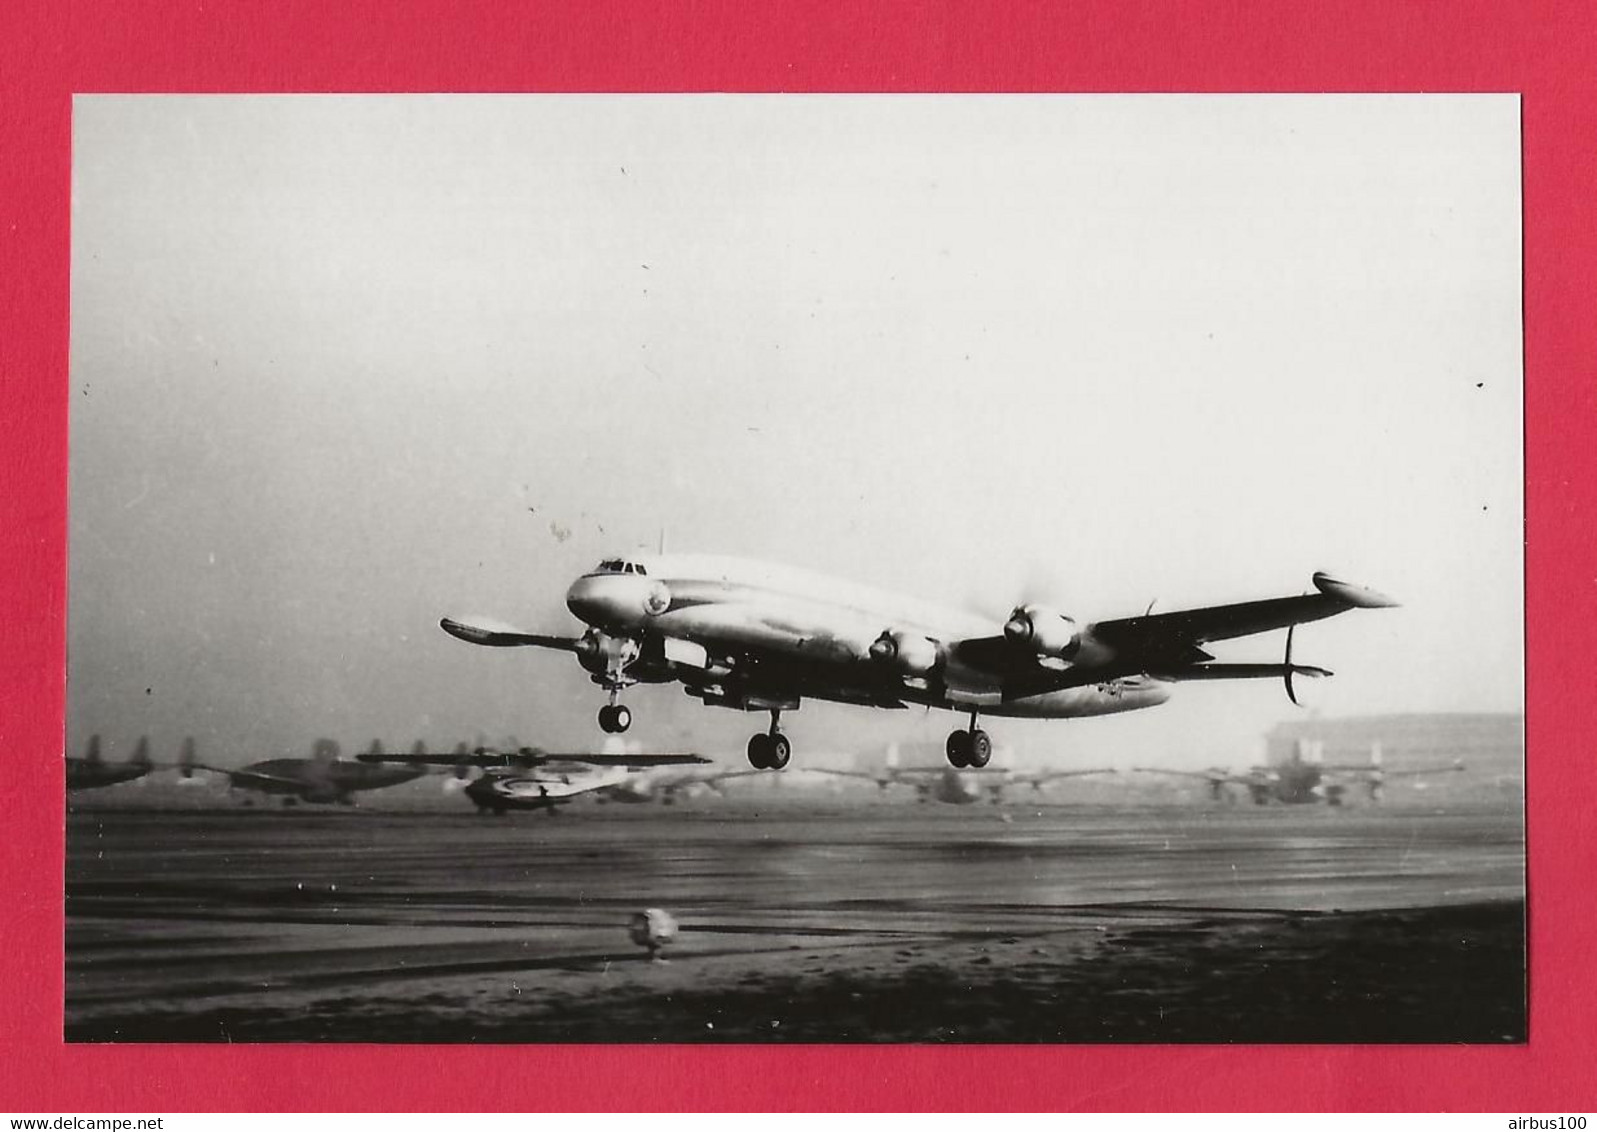 BELLE PHOTO REPRODUCTION AVION PLANE - COMPAGNIE LOCKHEED CONSTELLATION A L'ATTERRISSAGE - Aviazione